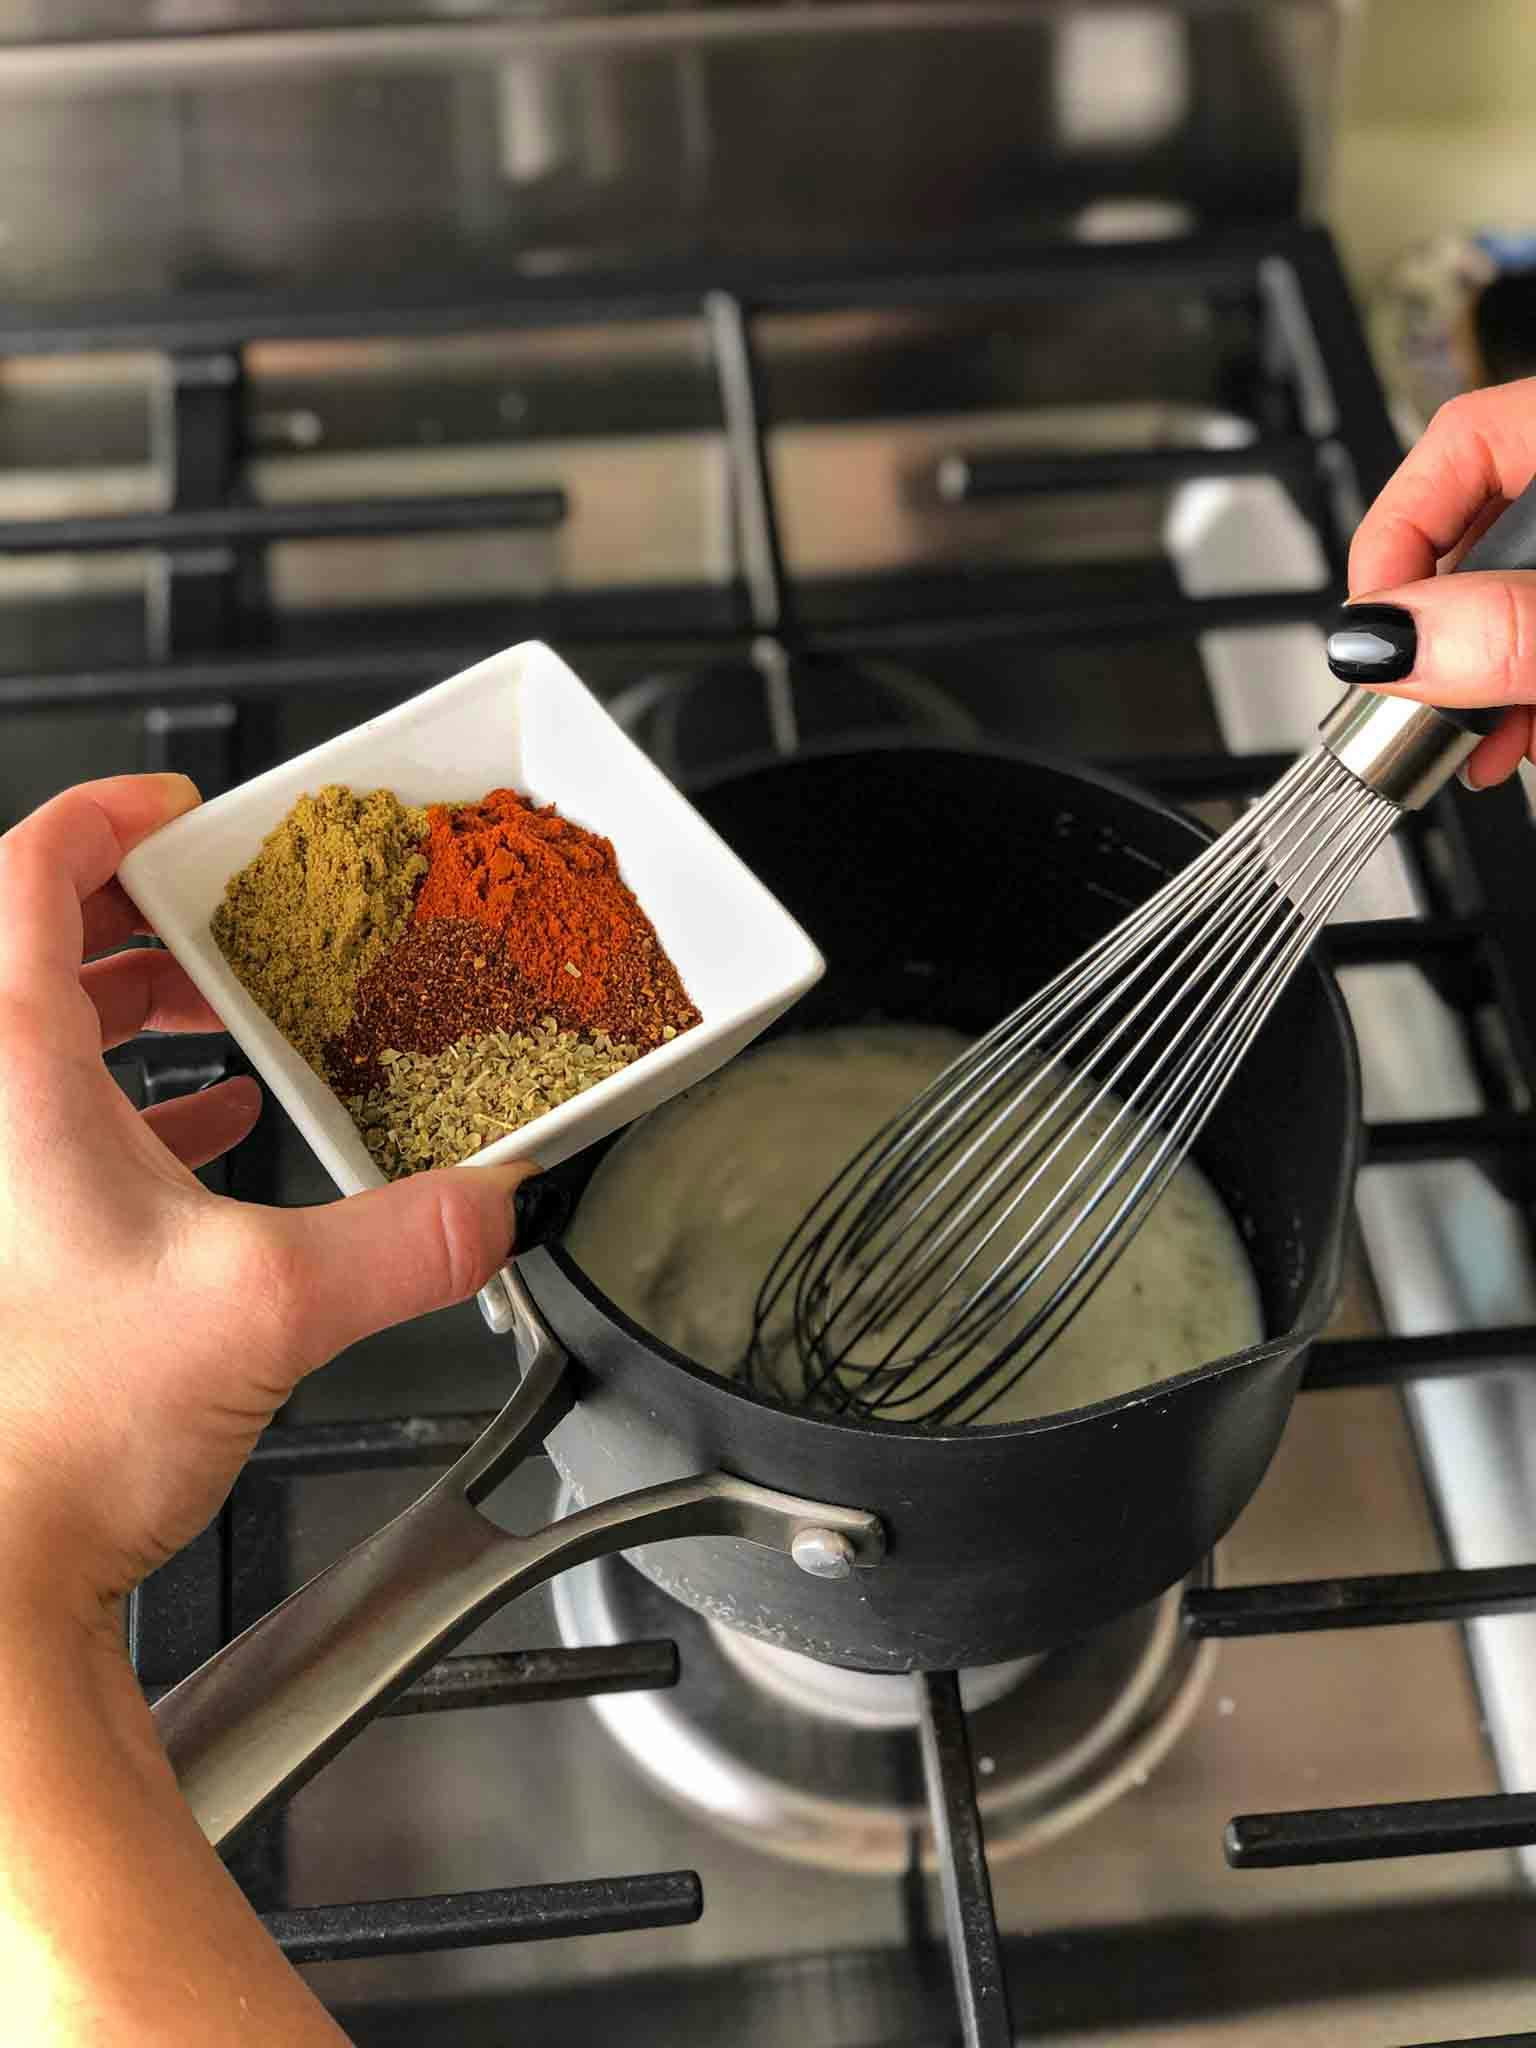 Spices being held over the sauce pan before being included.